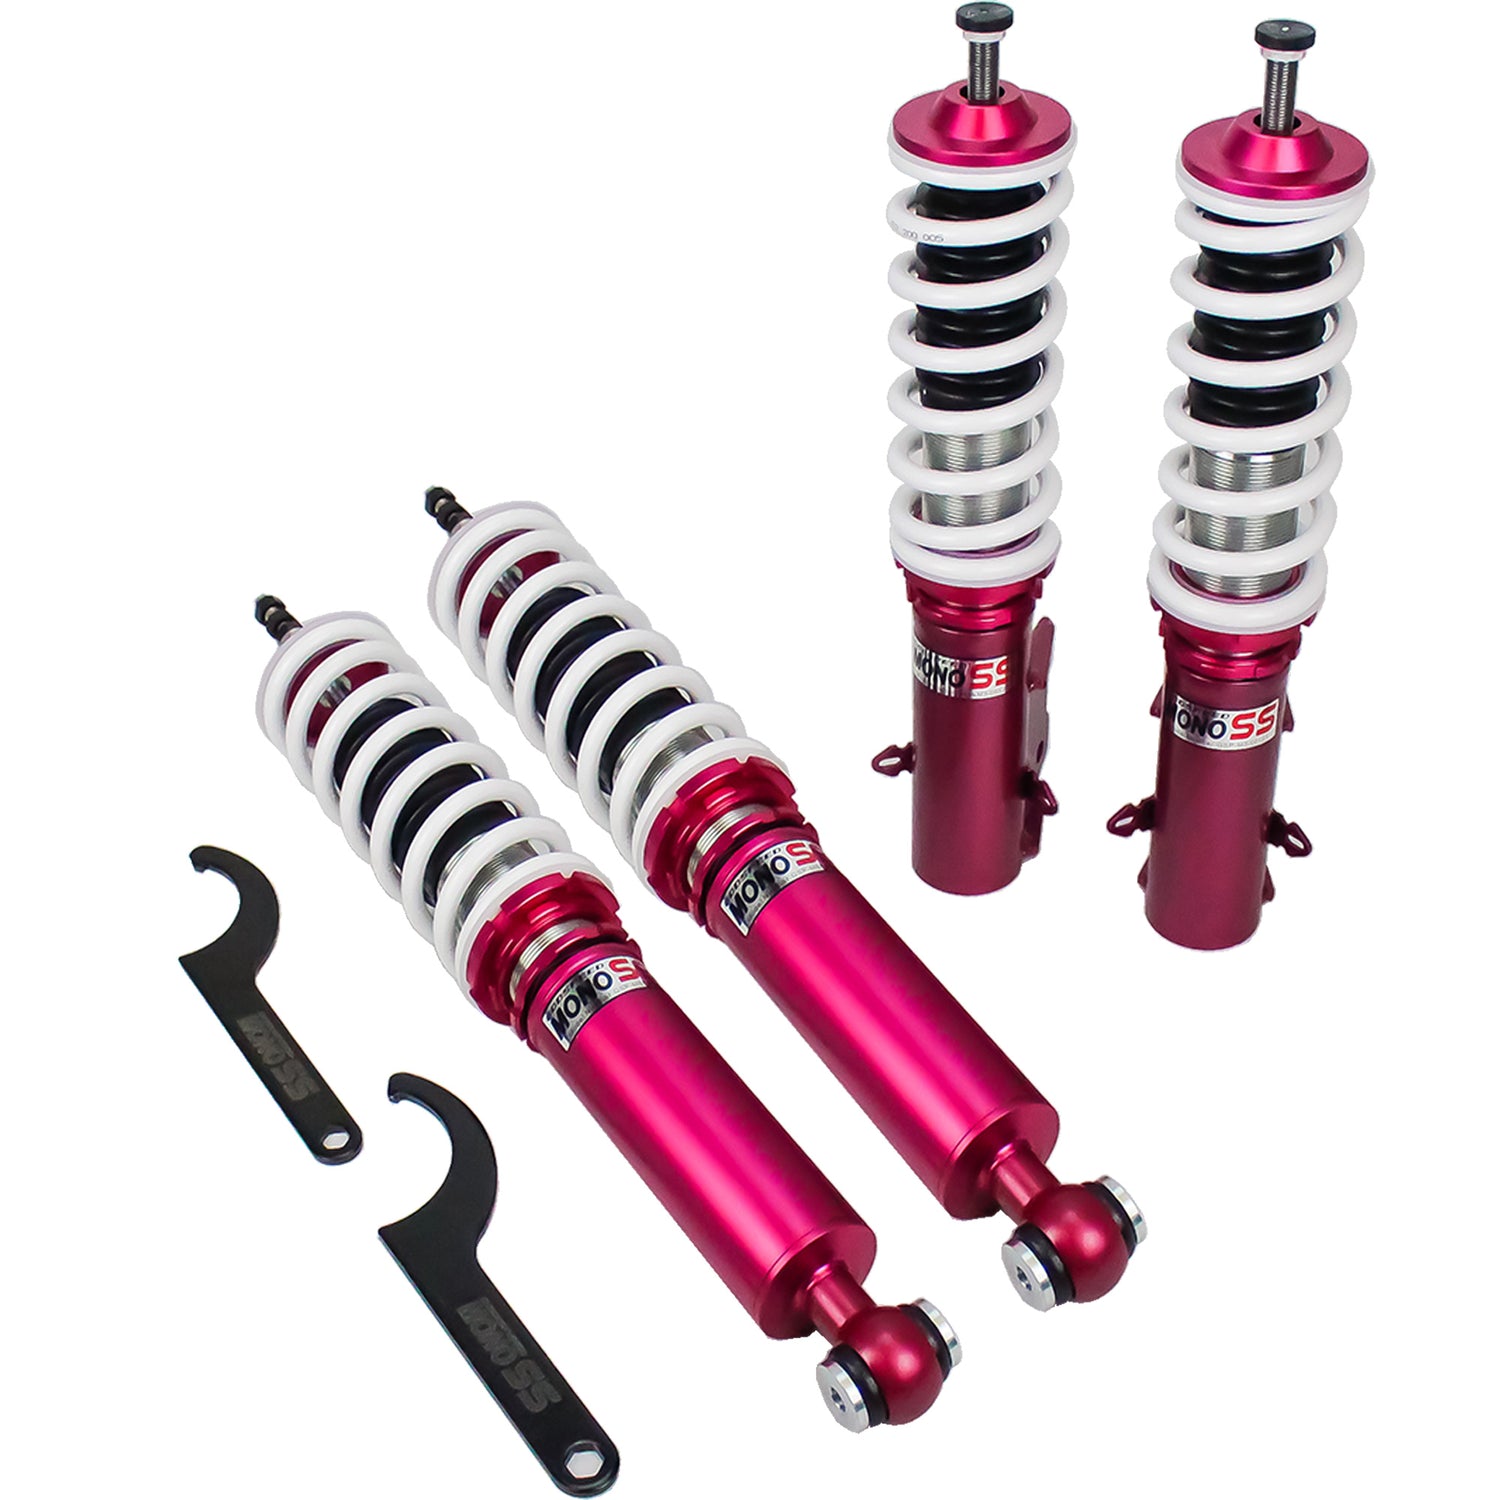 Godspeed MSS0121-A MonoSS Coilover Lowering Kit, Fully Adjustable, Ride Height, Spring Tension And 16 Click Damping, Volkswagen Golf GTI(MK2/MK3) 1983-92/93-98